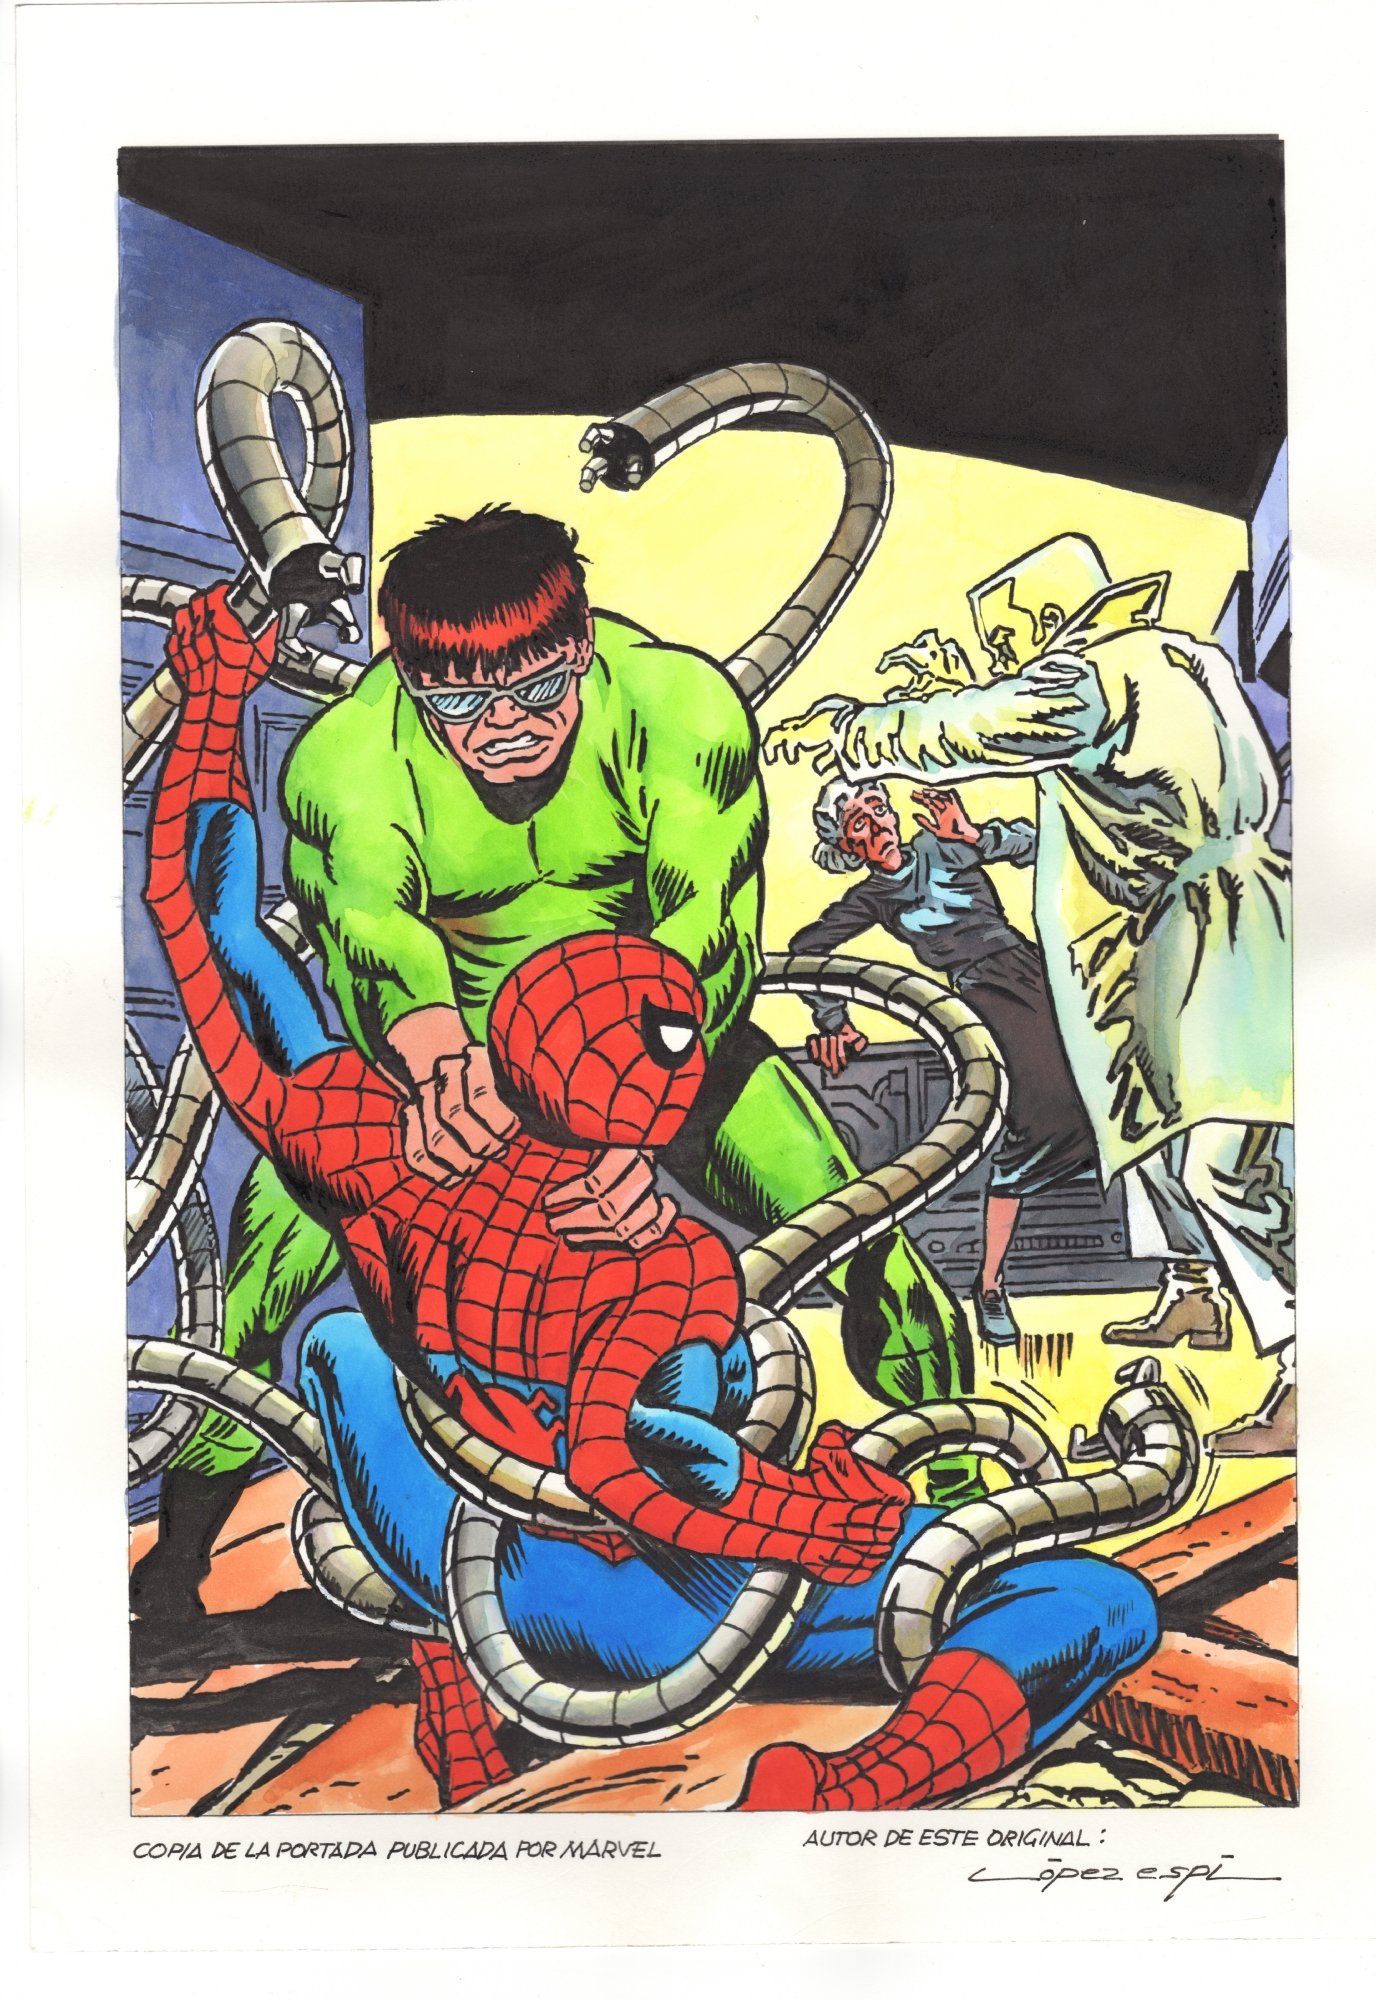 Spiderman El Hombre Araña #63E Vertice cover Lopez Espi Amazing Spider-man  Spectacular Friendly Neighborhood Spidey Superior Doctor Octopus Aunt May  Hammerhead, in R. Meza's Commissions and convention sketches Comic Art  Gallery Room